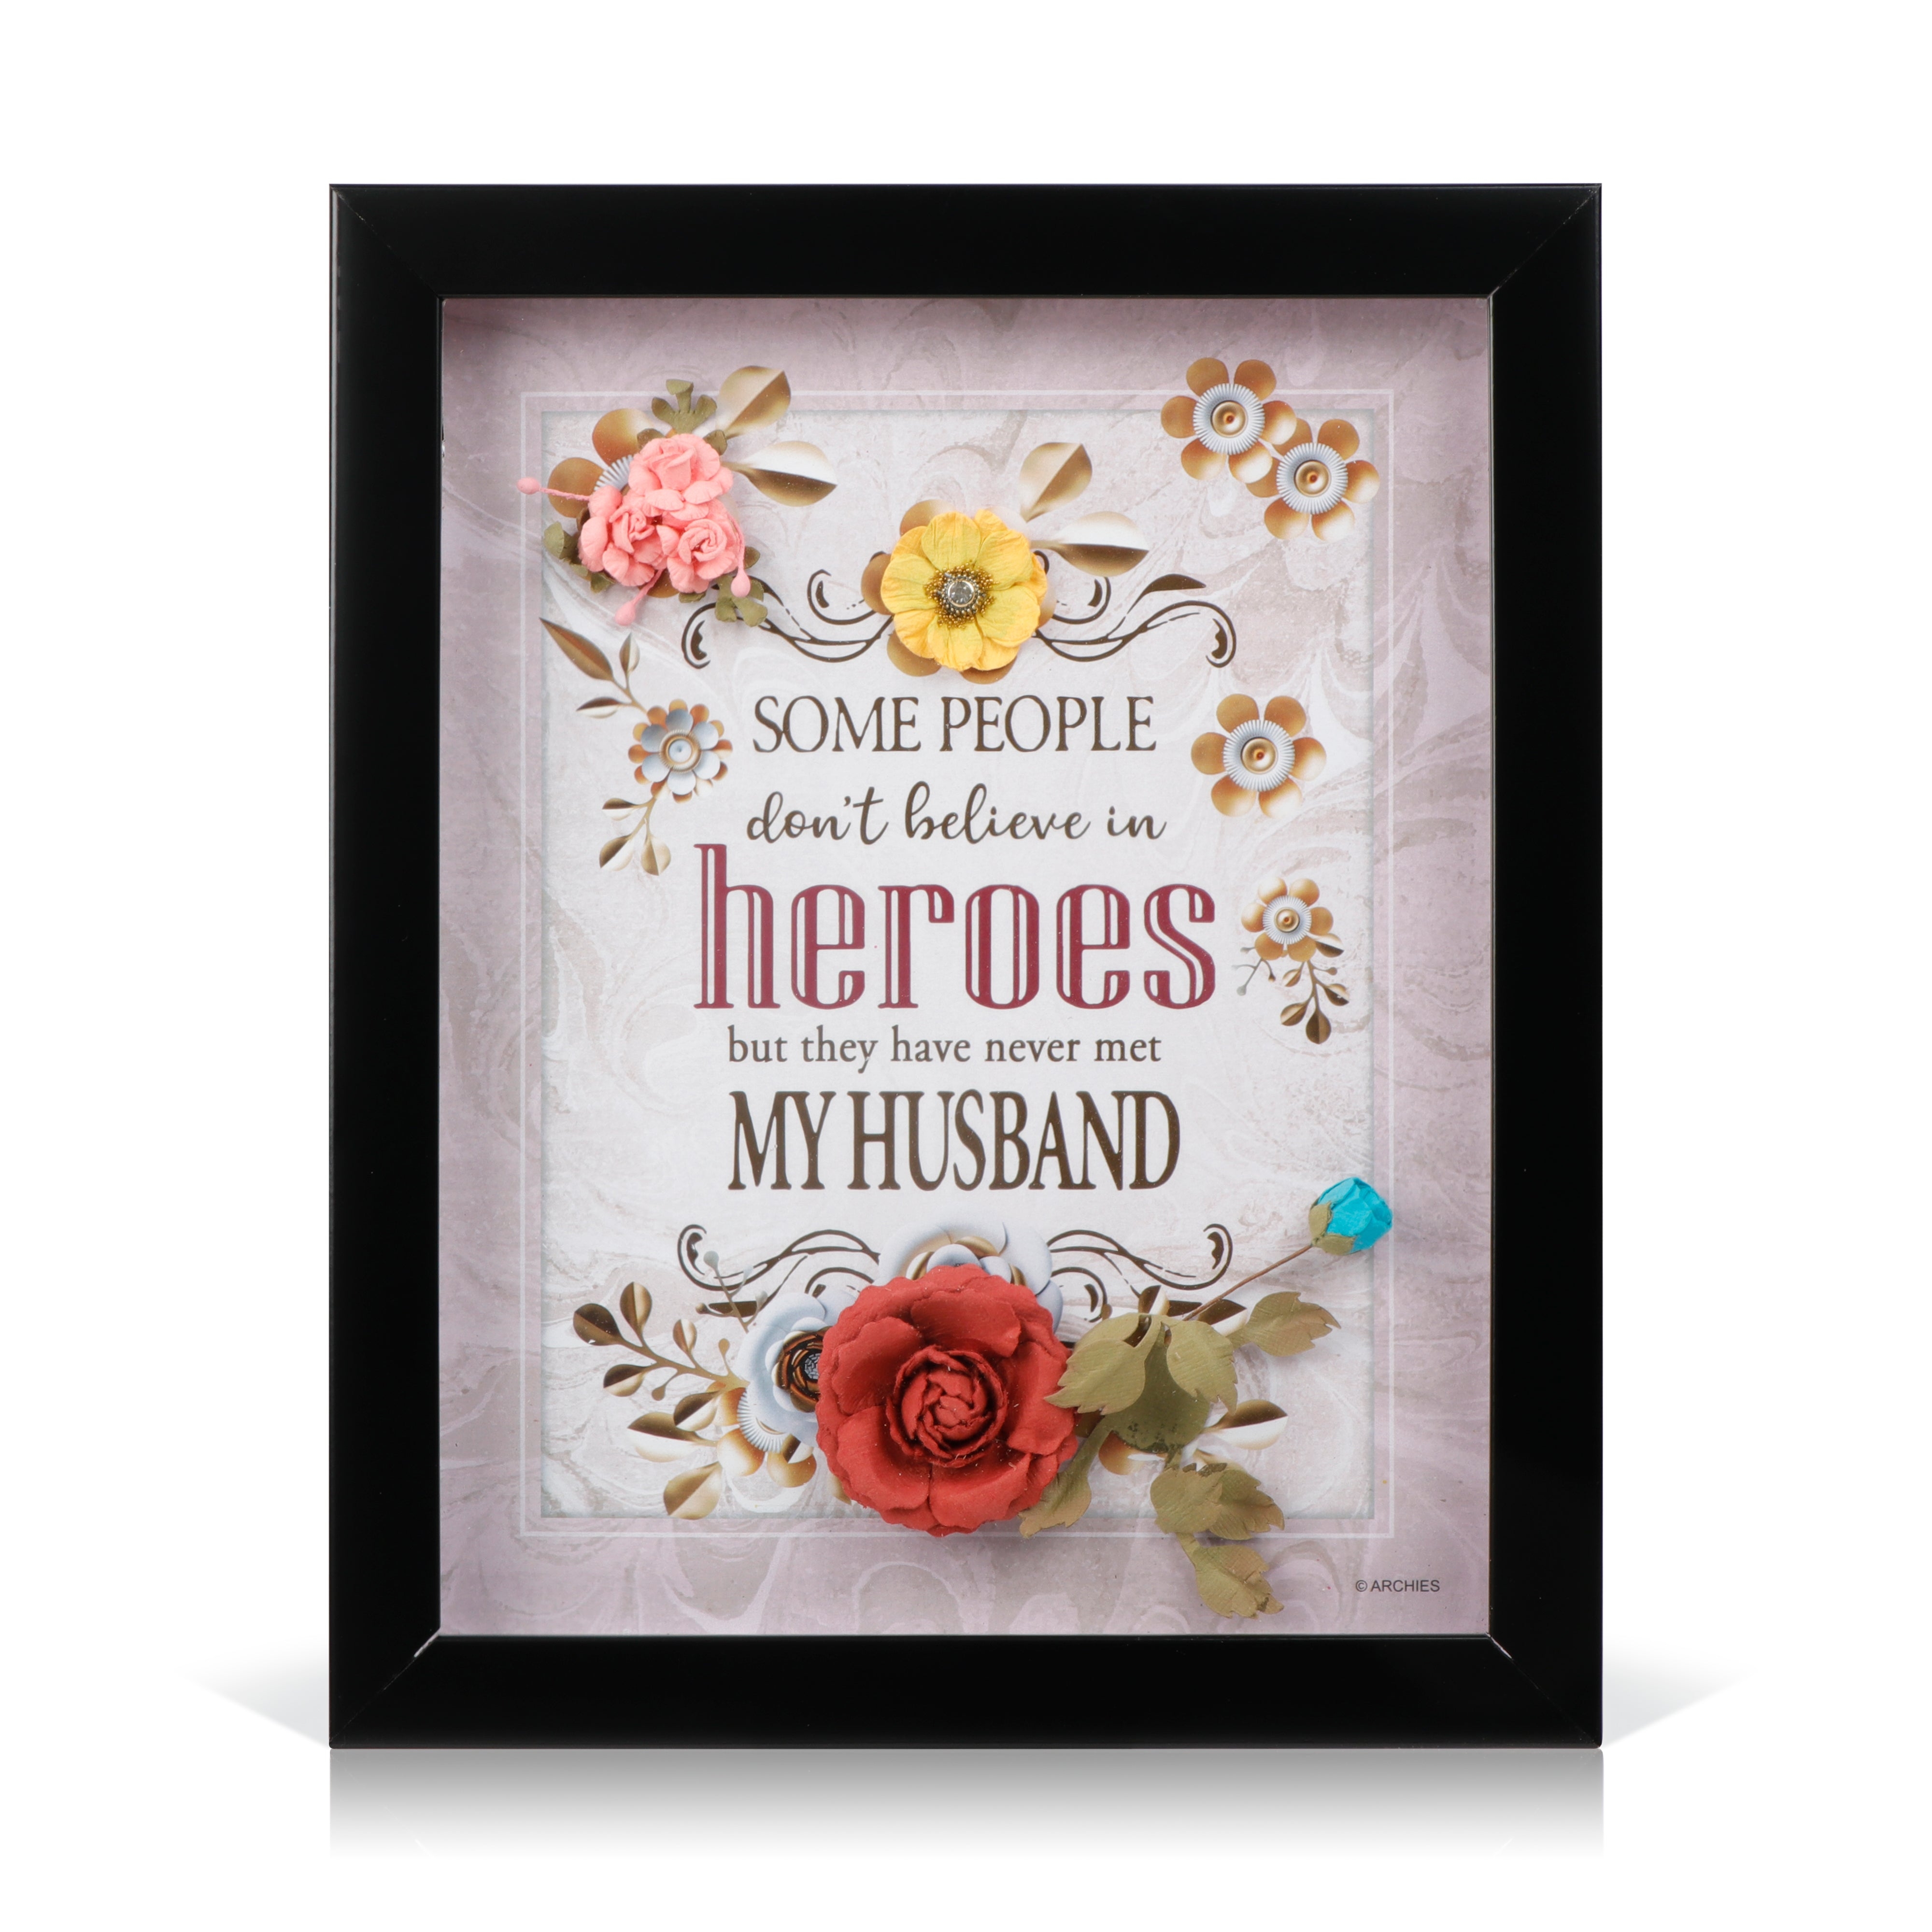 Archies KEEPSAKE QUOTATION - SOMEONE DONT......MY HUSBAND For gifting and Home décor